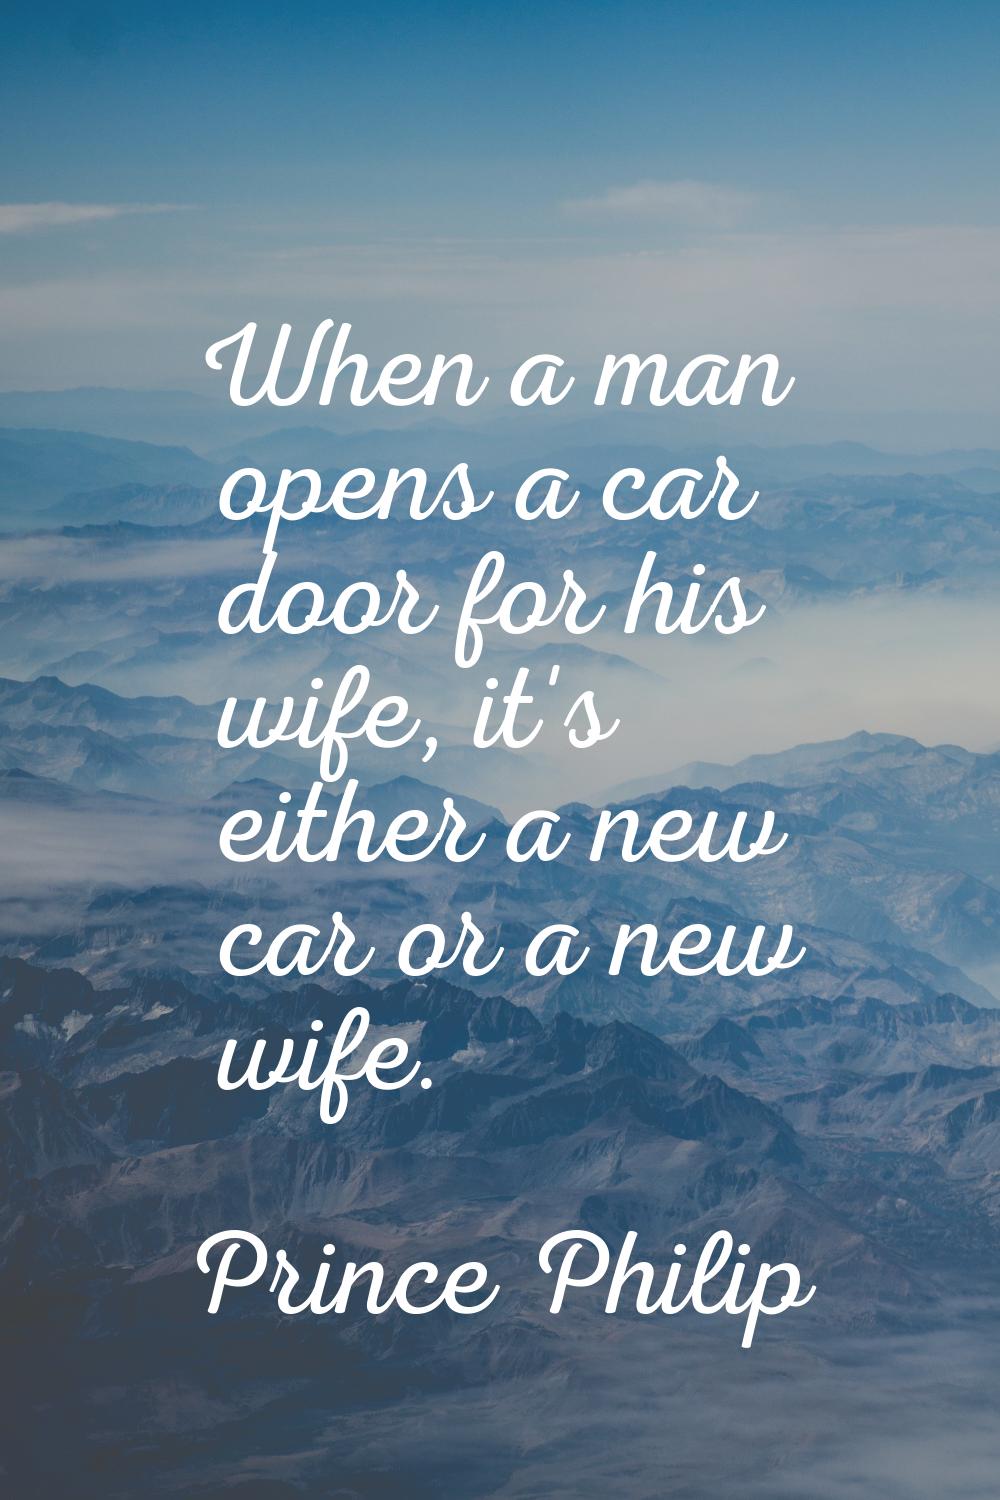 When a man opens a car door for his wife, it's either a new car or a new wife.